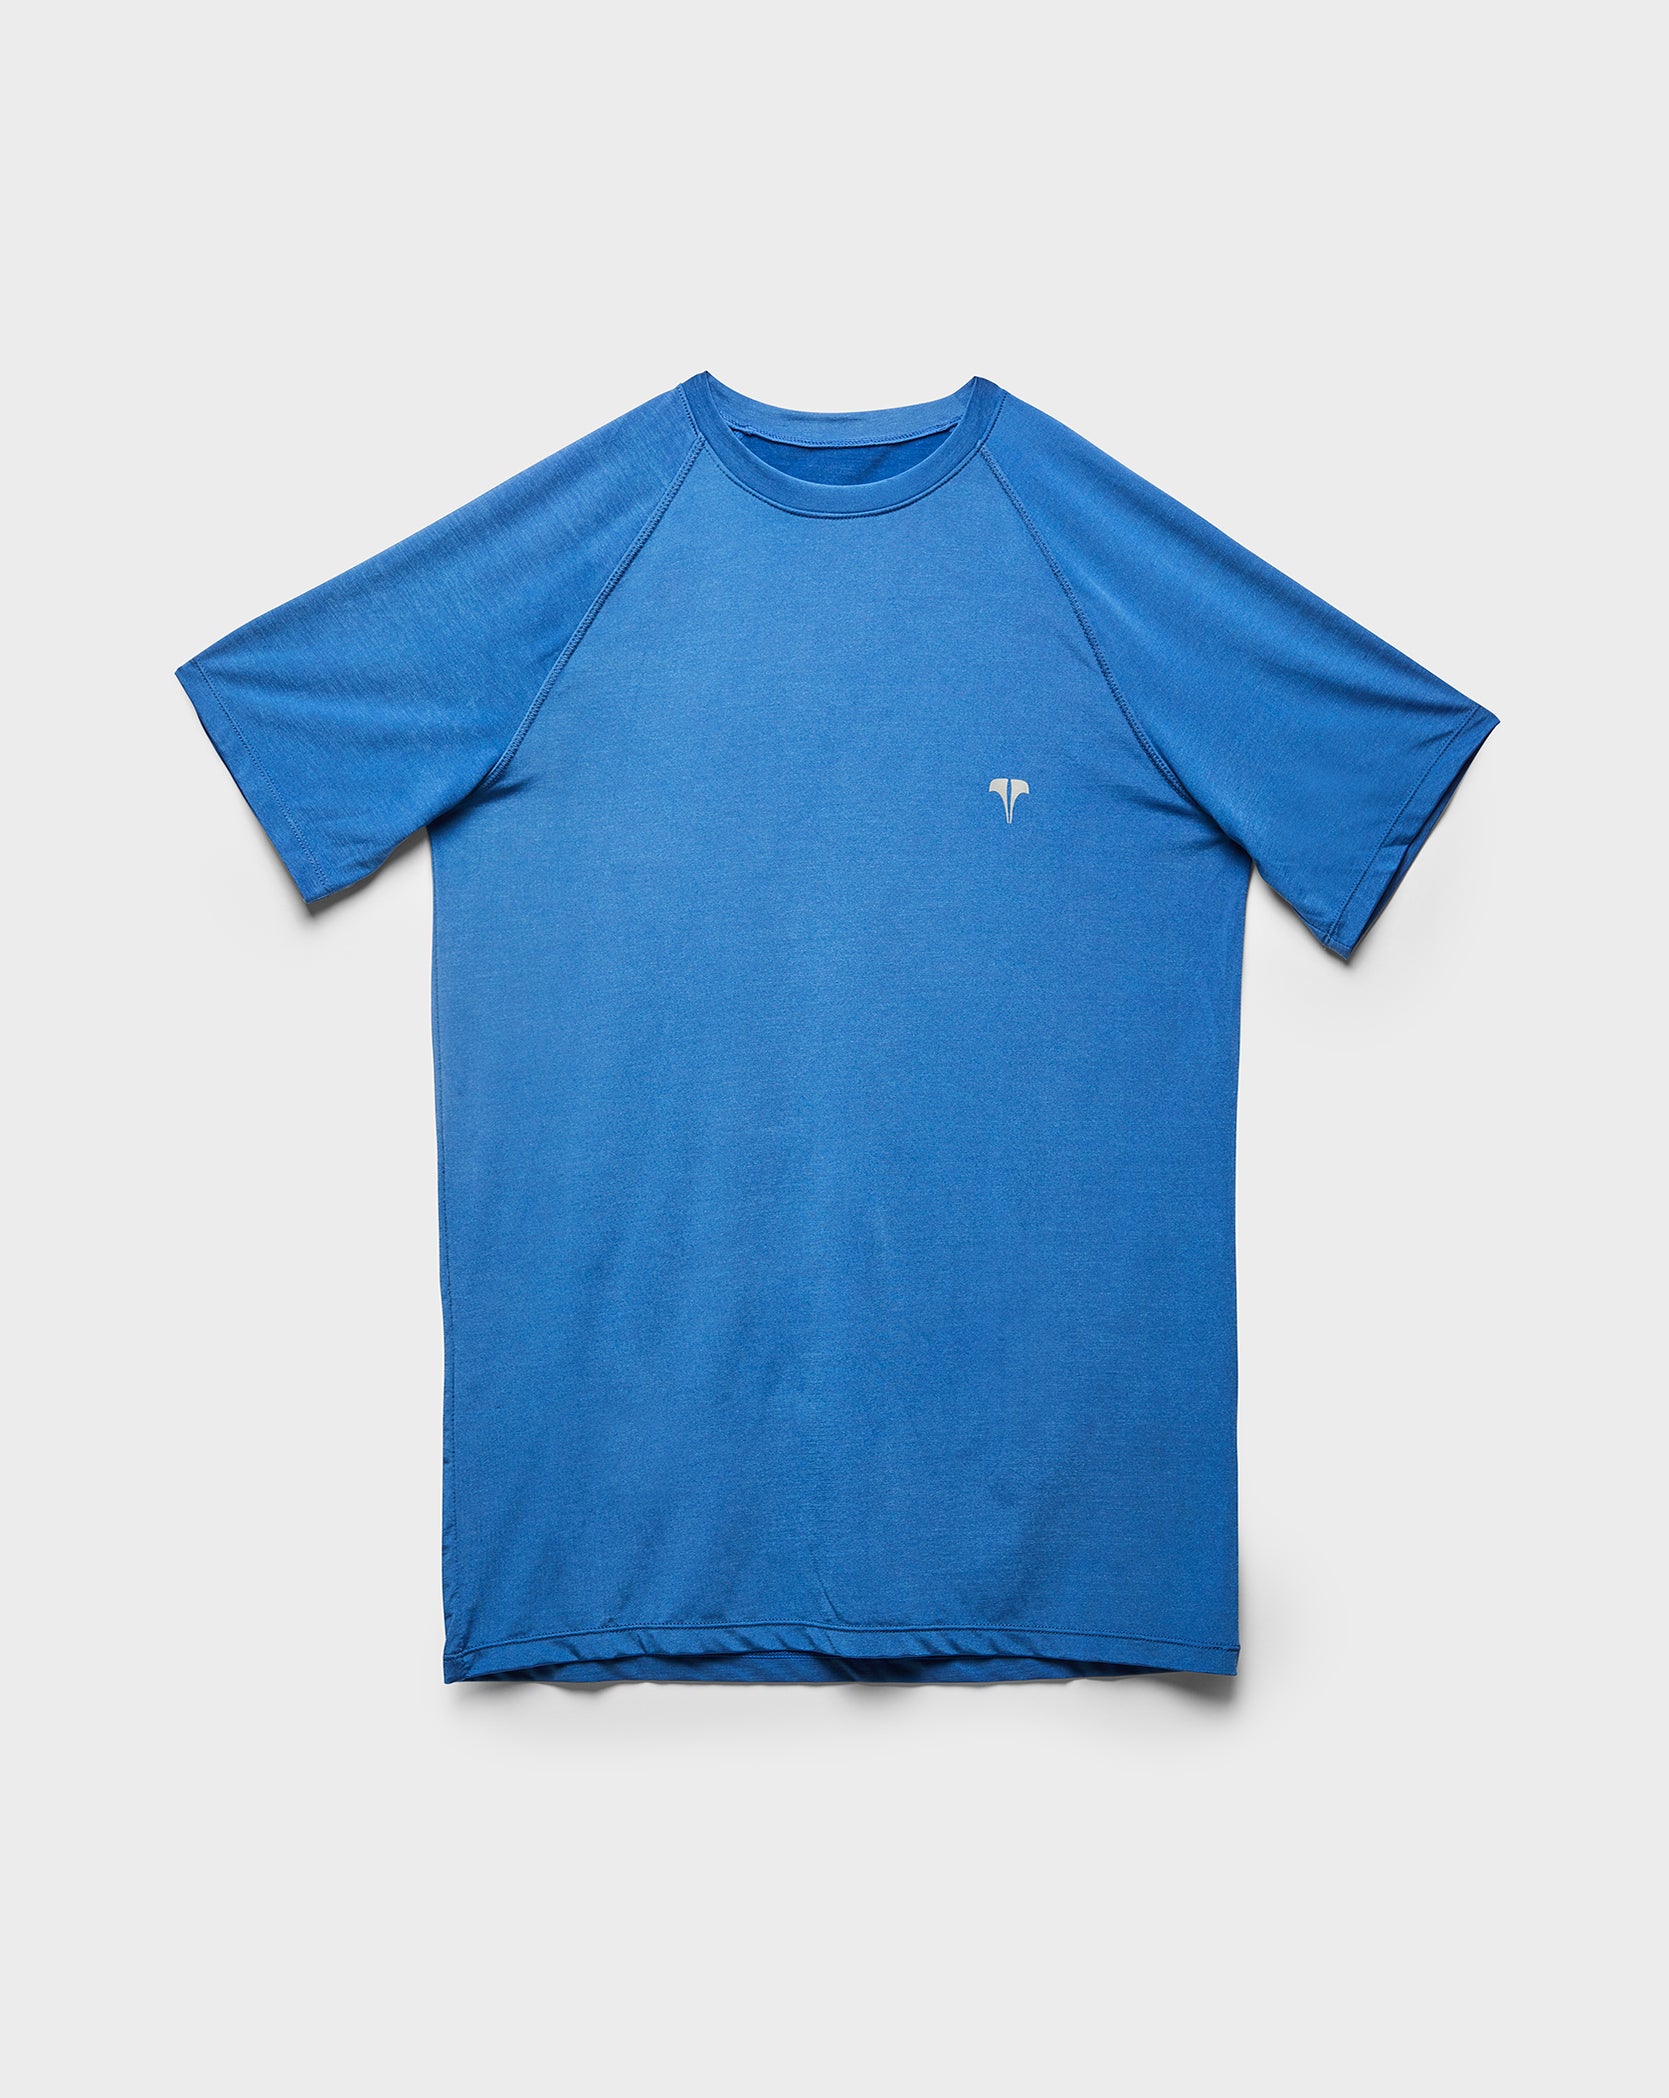 Twinzz active blue t-shirt front